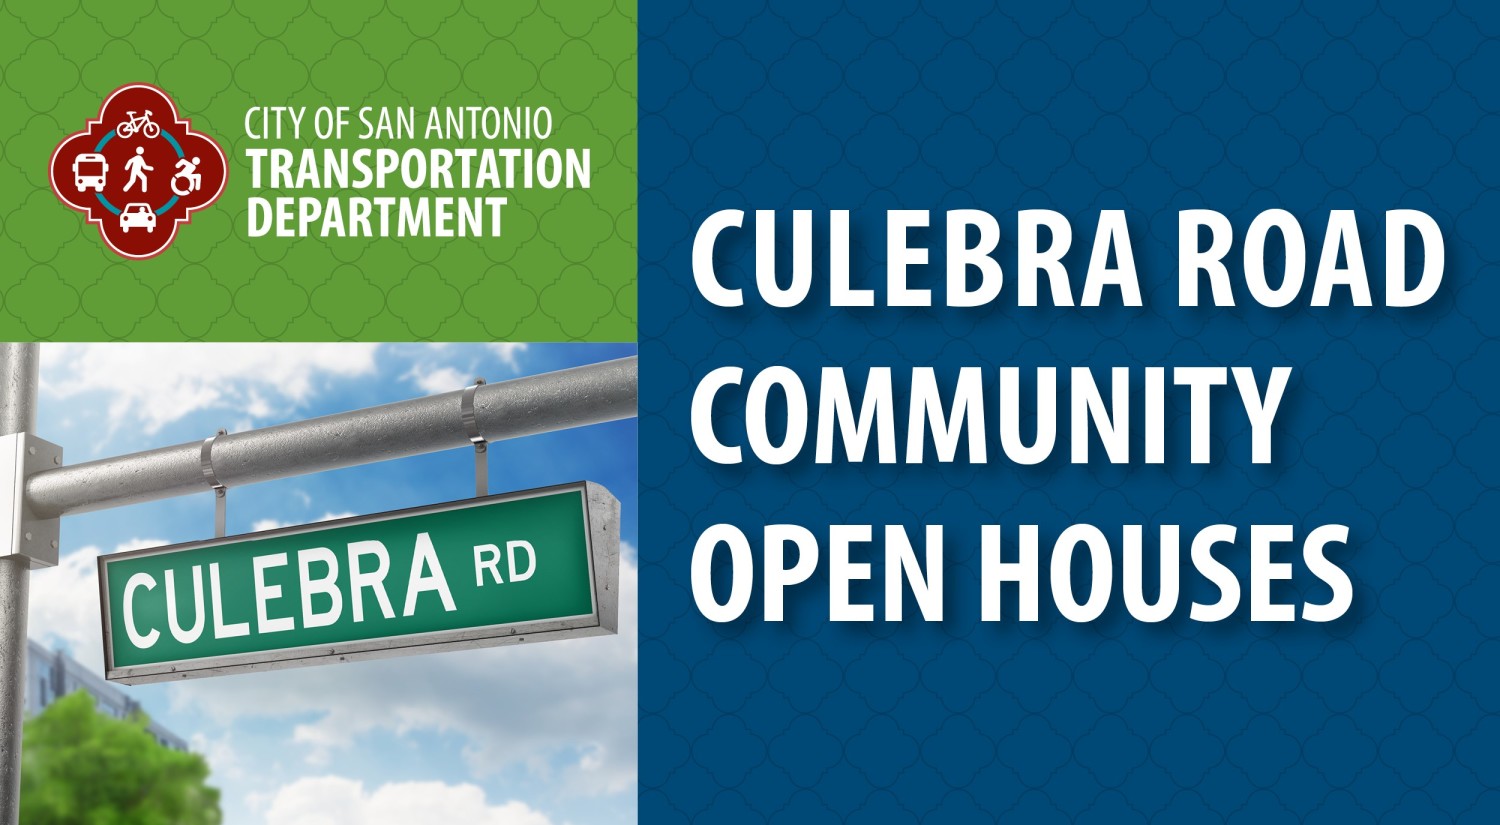 Featured image for Culebra Road Community Open Houses